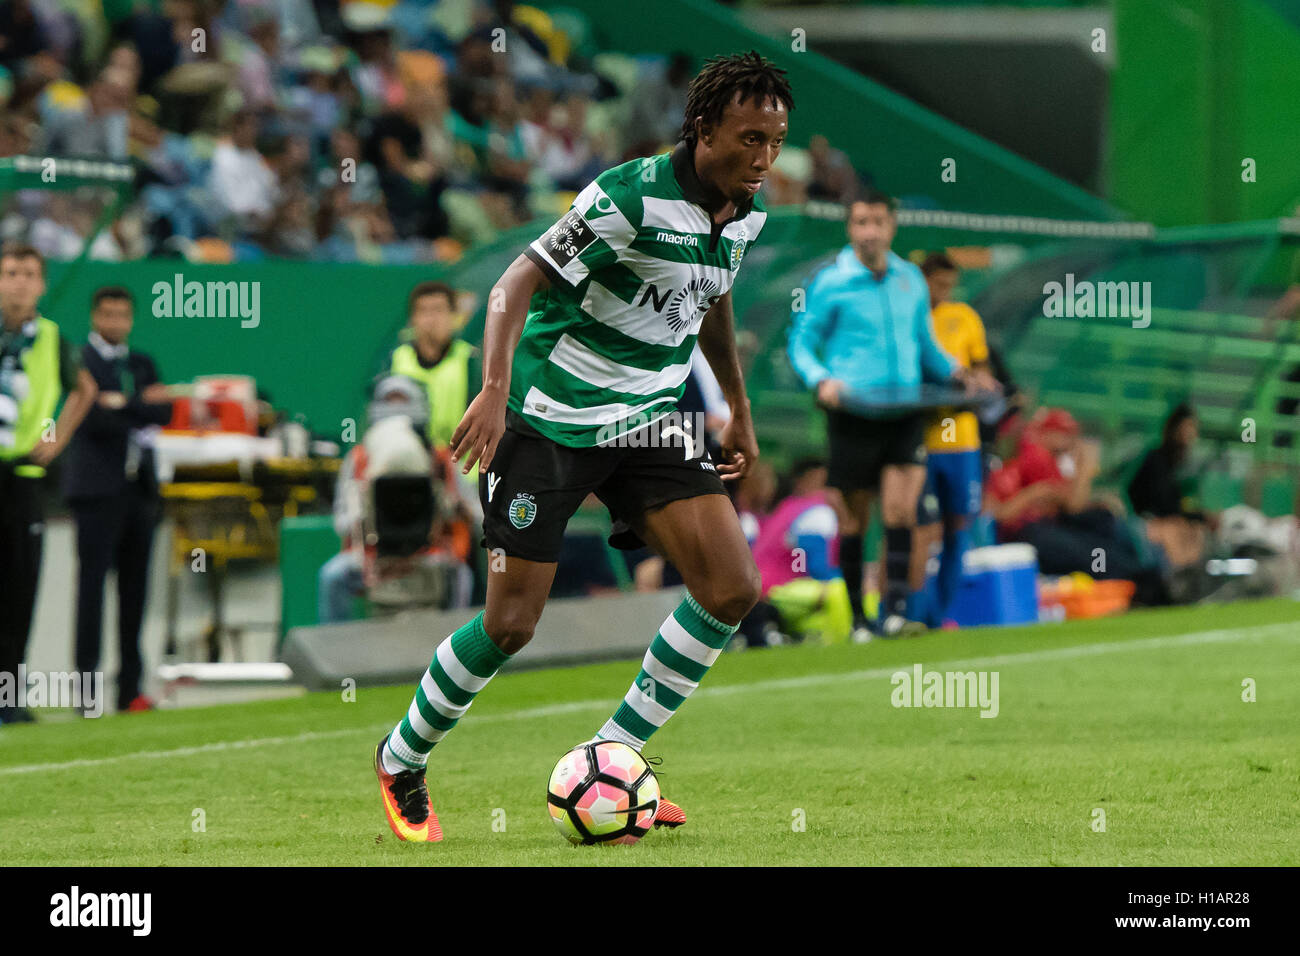 Portugal, Lisbon, Sep. 23, 2016 - PORTUGUESE FOOTBALL - Gelson Martins in action during Portuguese First League match between Sporting and Estoril at Alvalade XXI Stadium, in Lisbon, Portugal. Credit:  Bruno de Carvalho/Alamy Live News Stock Photo